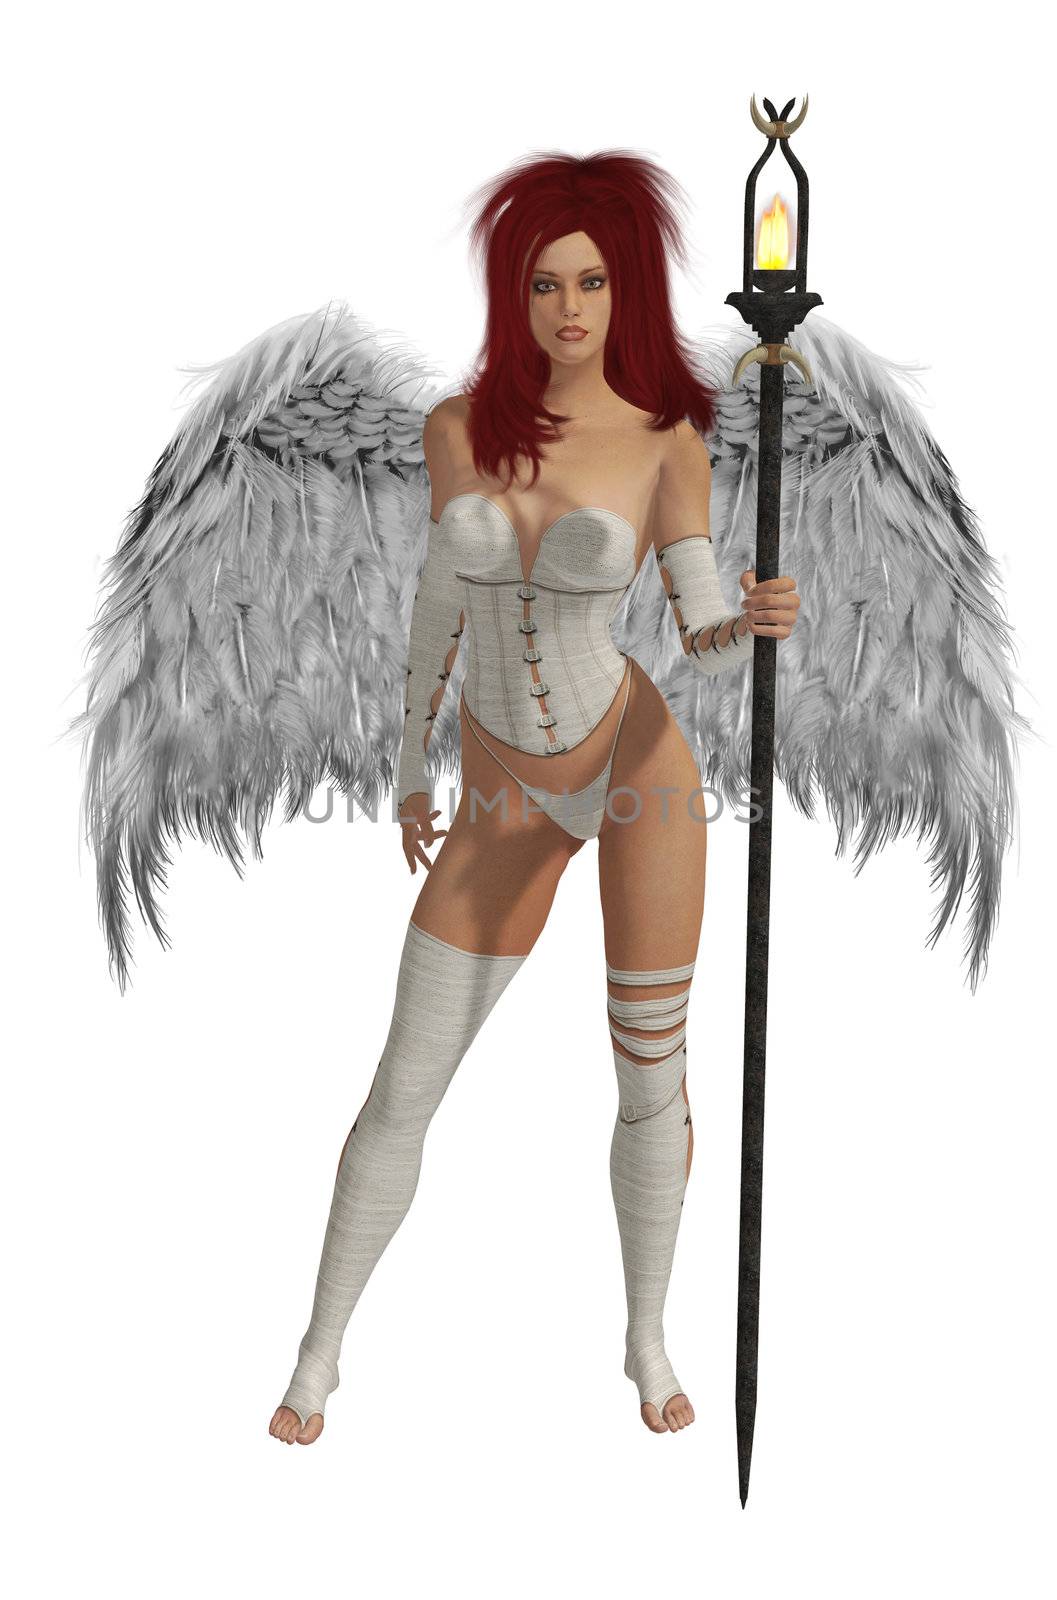 White Winged Angel With Red Hair by kathygold